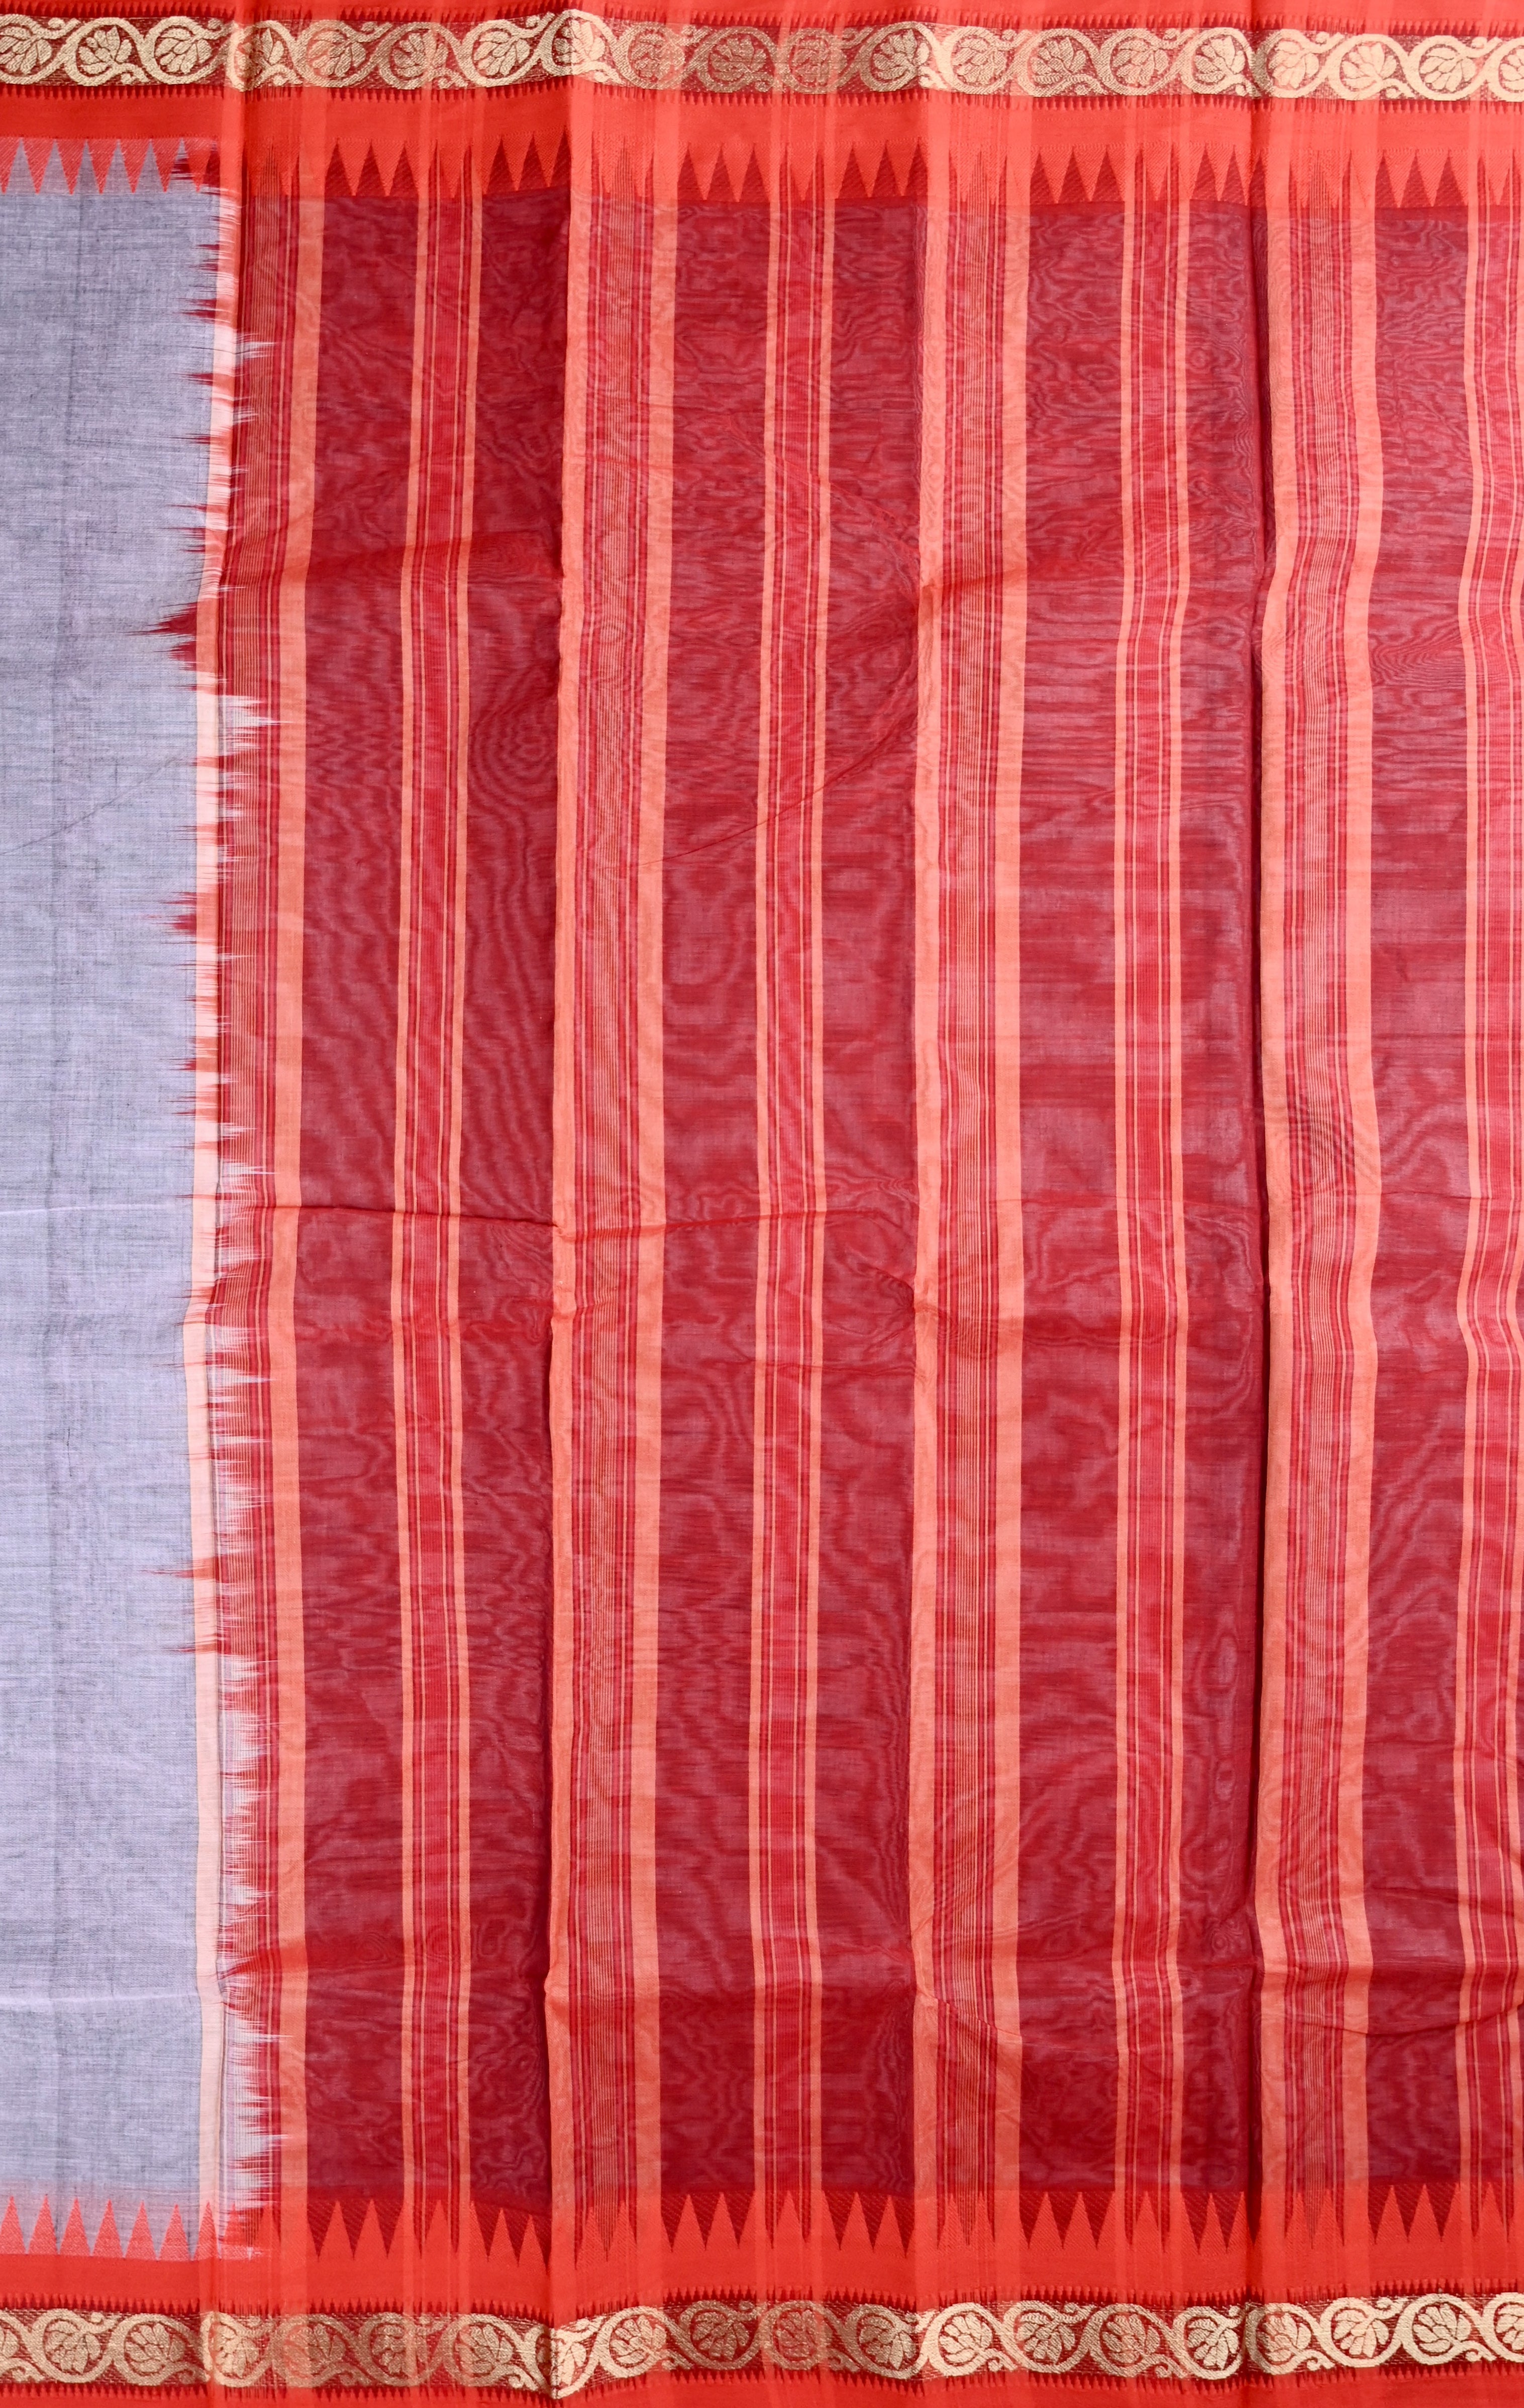 Dhaka cotton saree ash and red color with small zari border, big contrast pallu and plain blouse.